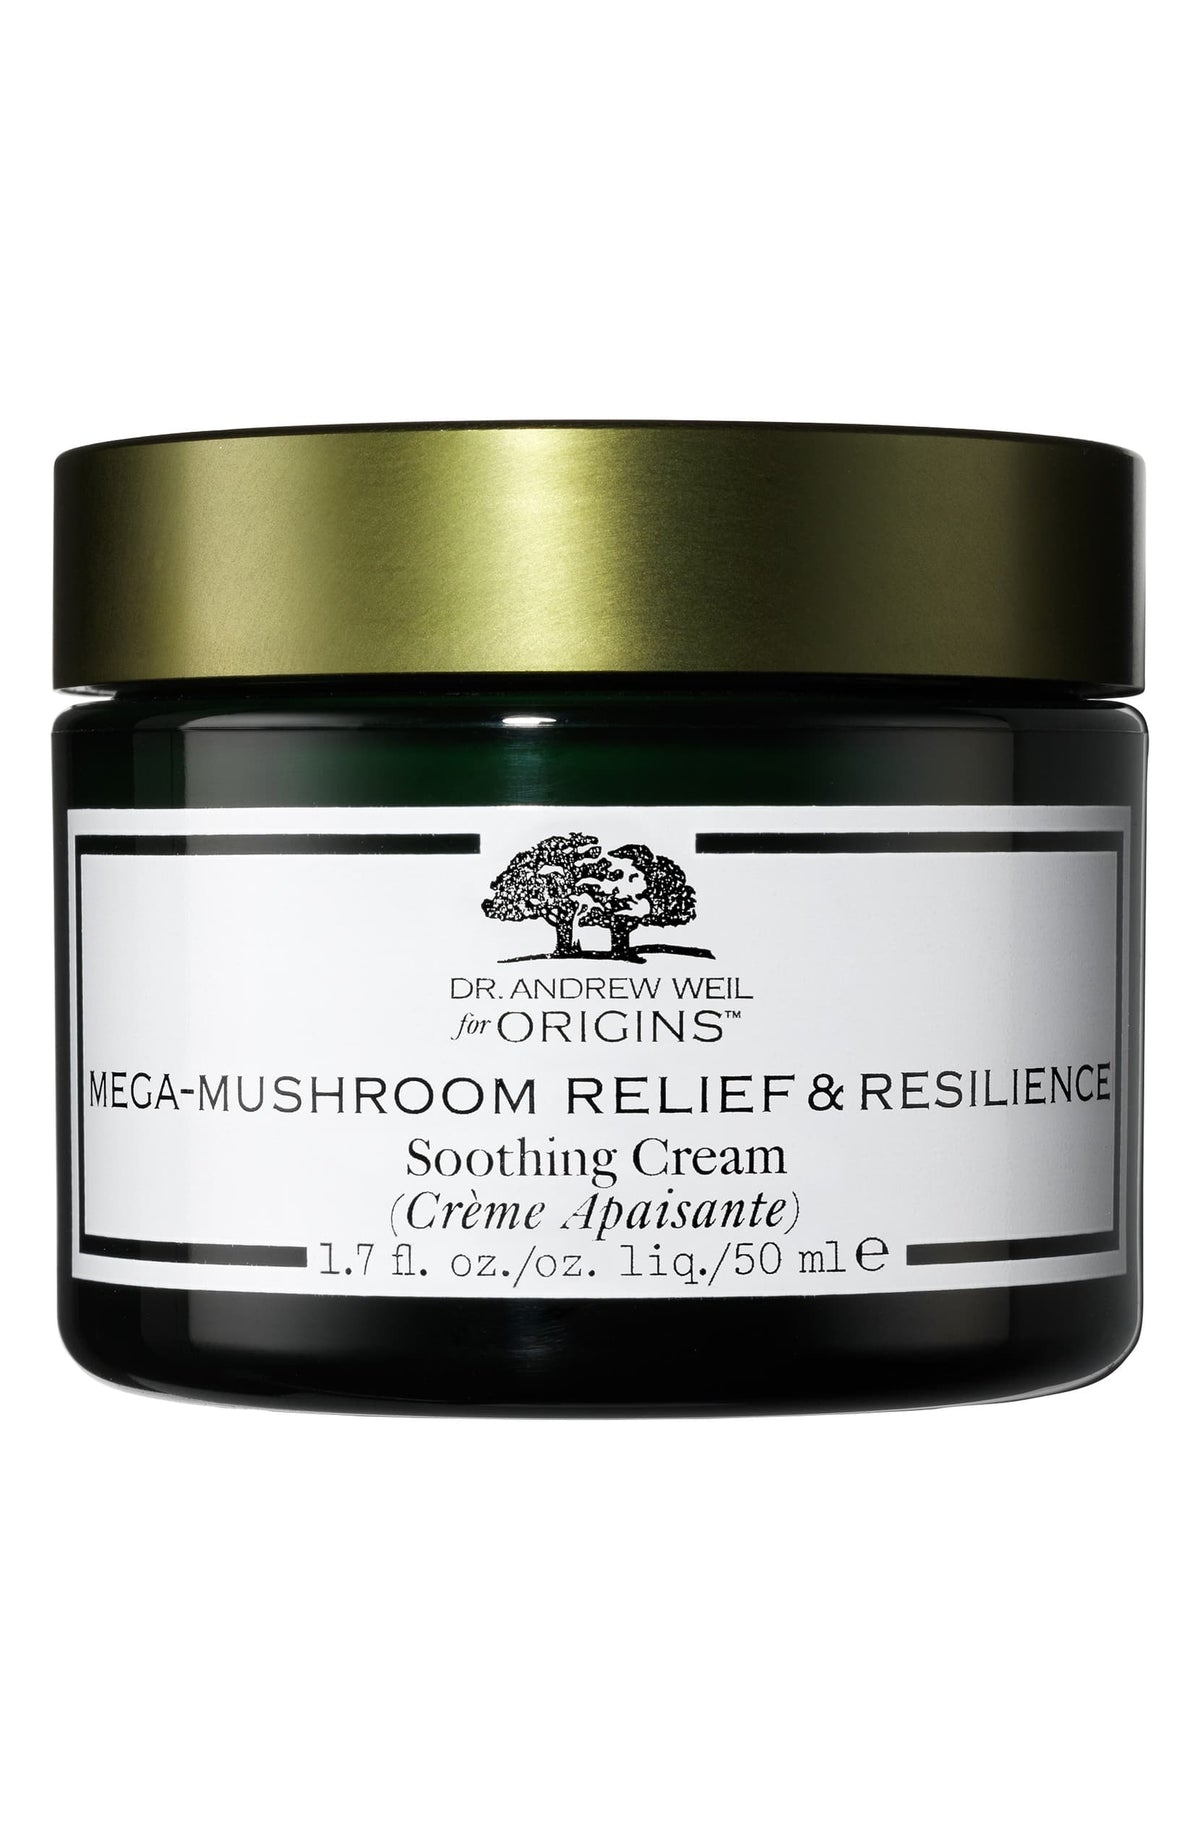 Origins Dr. Andrew Weil for Origins Mega-Mushroom Relief & Resilience Soothing Cream - eCosmeticWorld